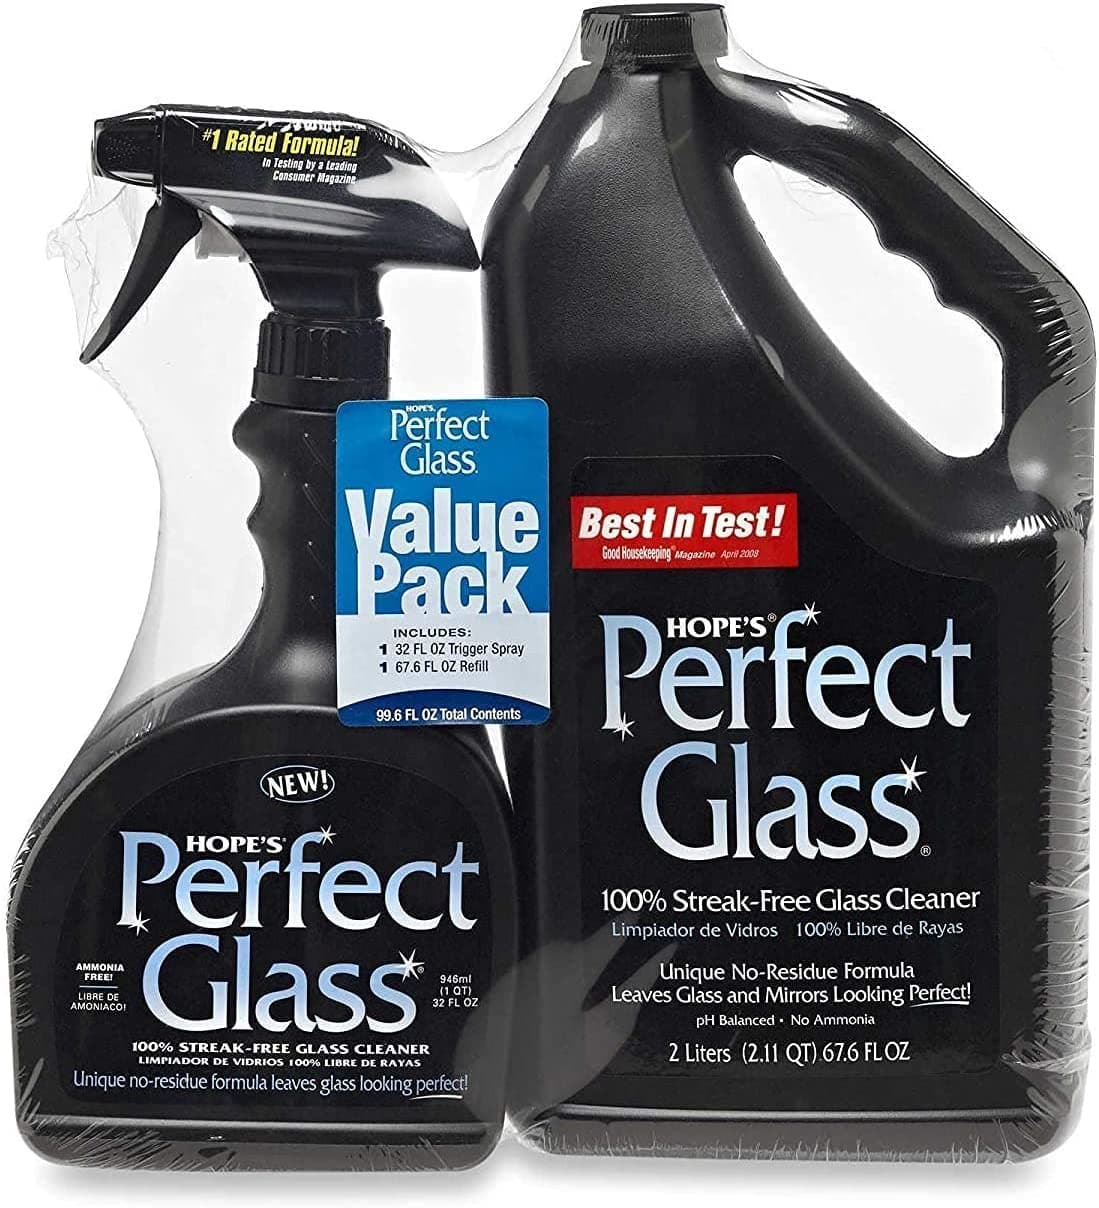 Hope's Perfect Glass Cleaner 2 Piece | 950 ml Spray Bottle and 2 Litre Refill Bottle